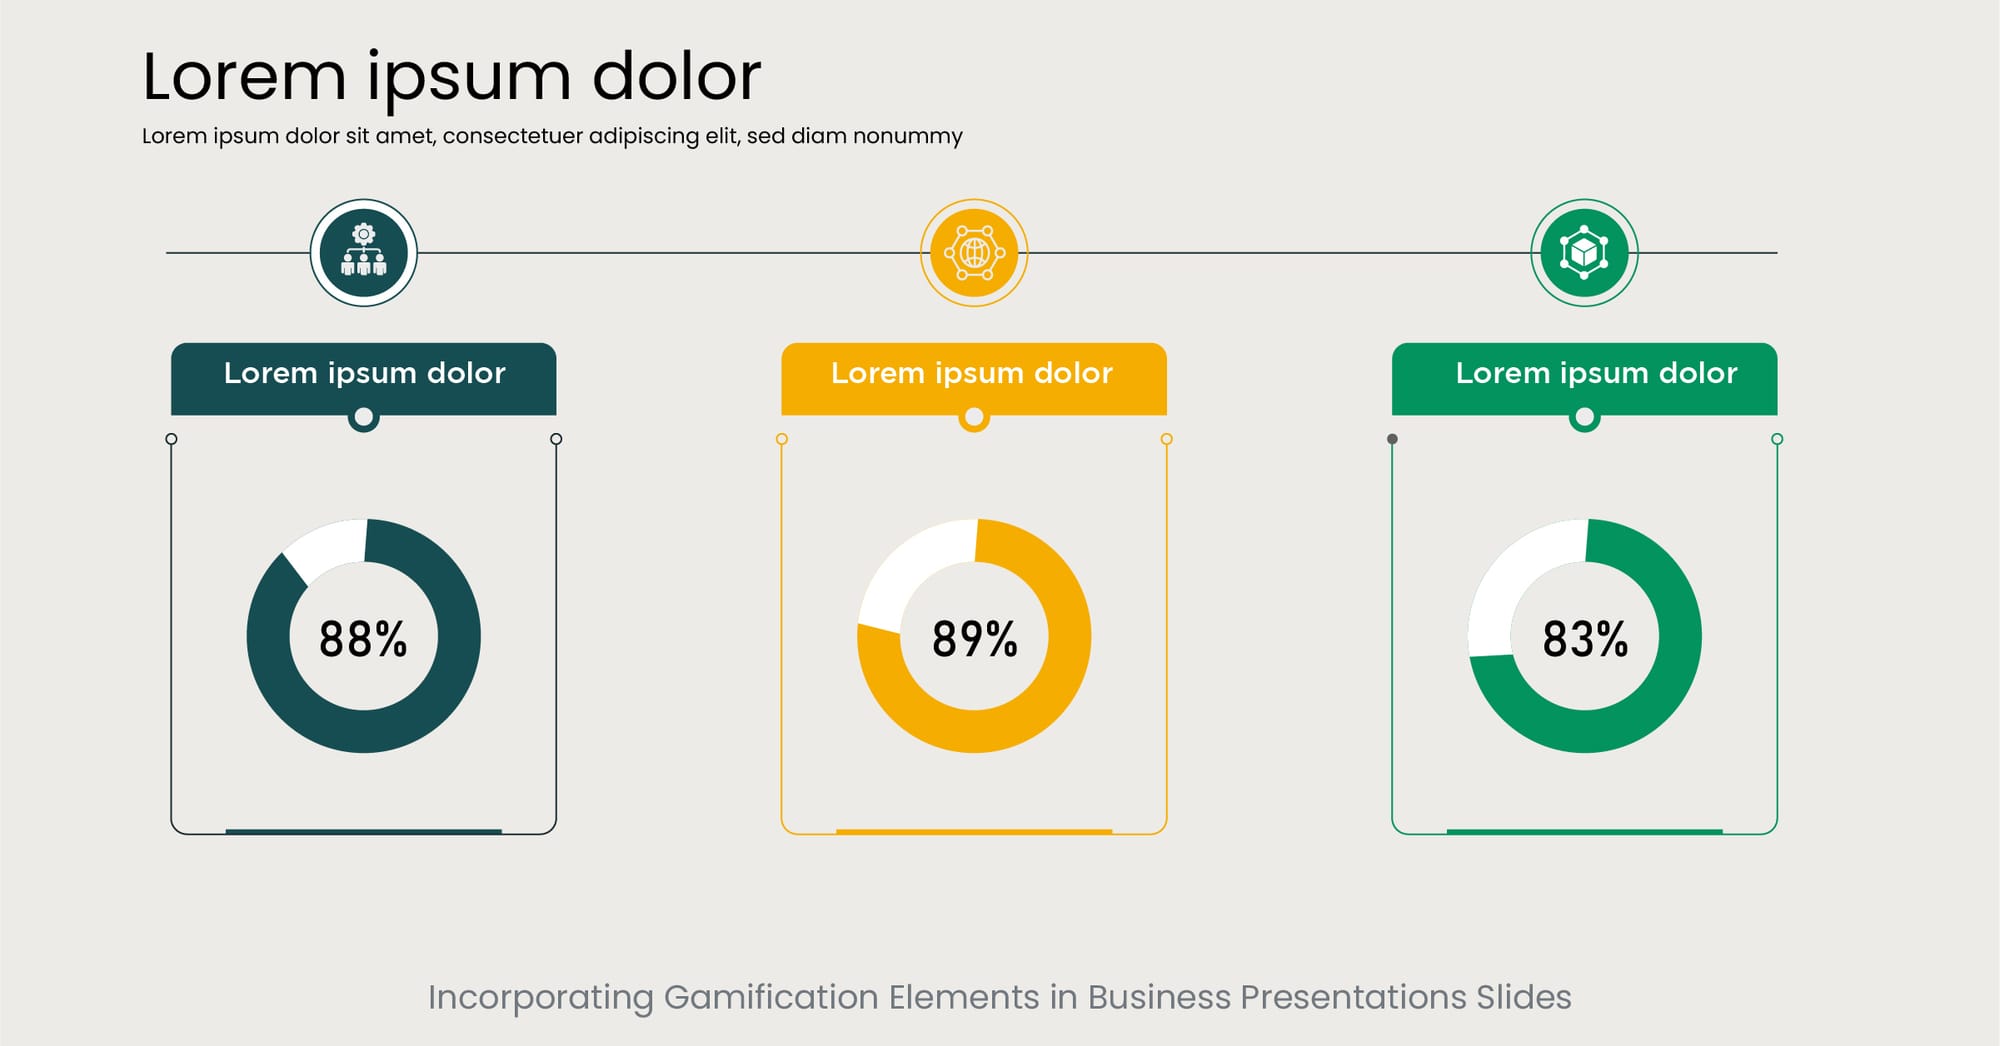 Incorporating Gamification Elements in Business Presentations Slides